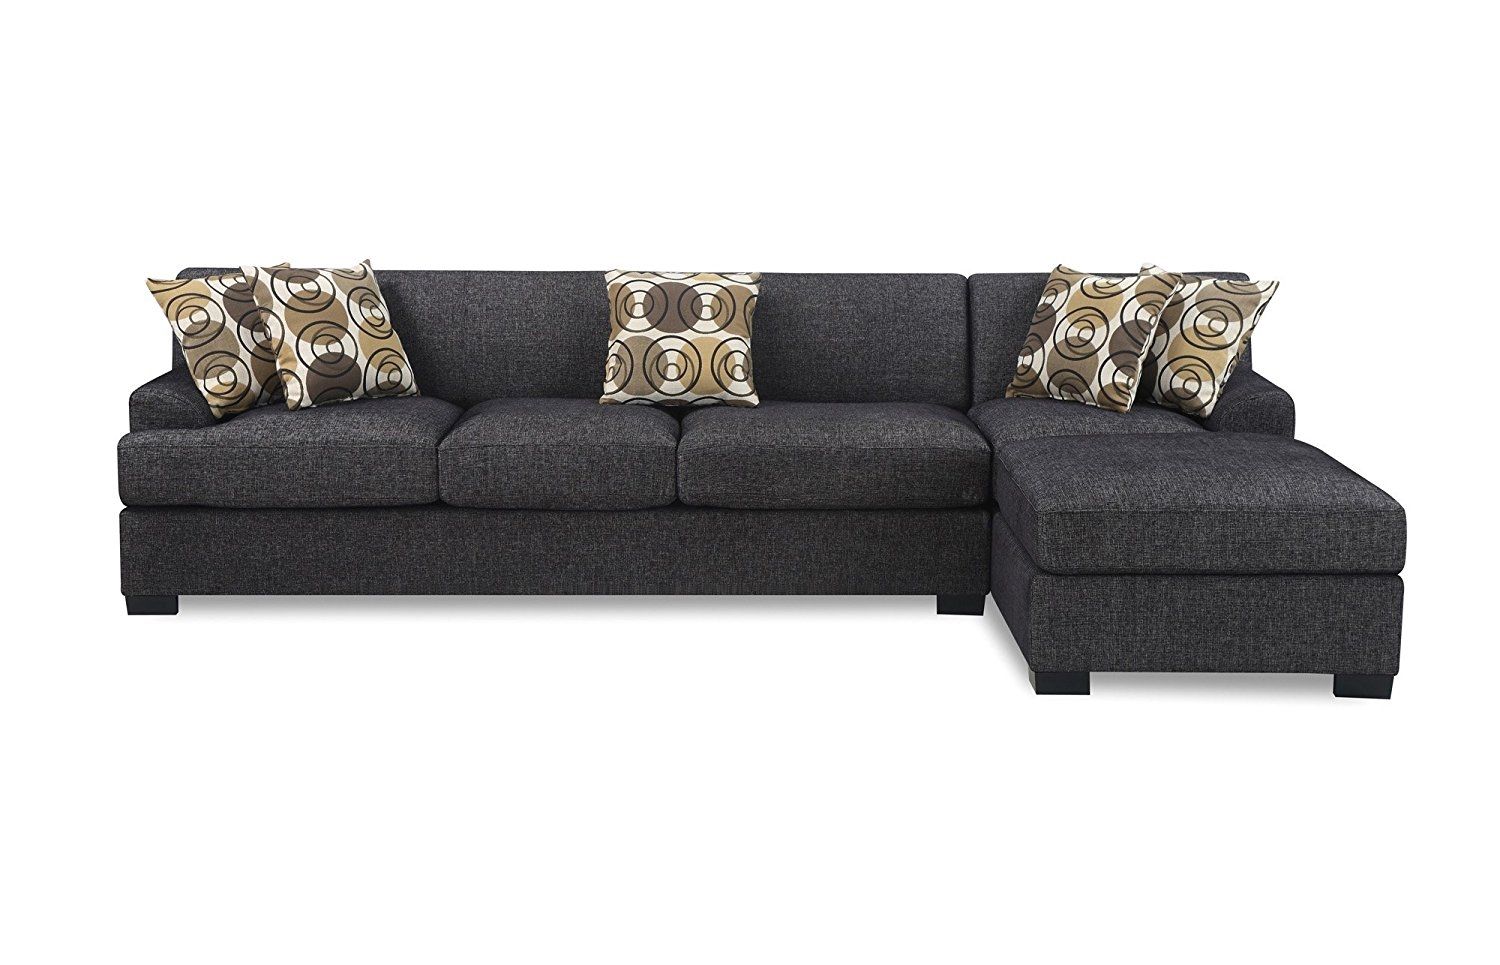 6 Most Comfortable Sectional Sofas 2017 Home Reviewed Intended For Comfortable Sectional Sofa (View 15 of 15)